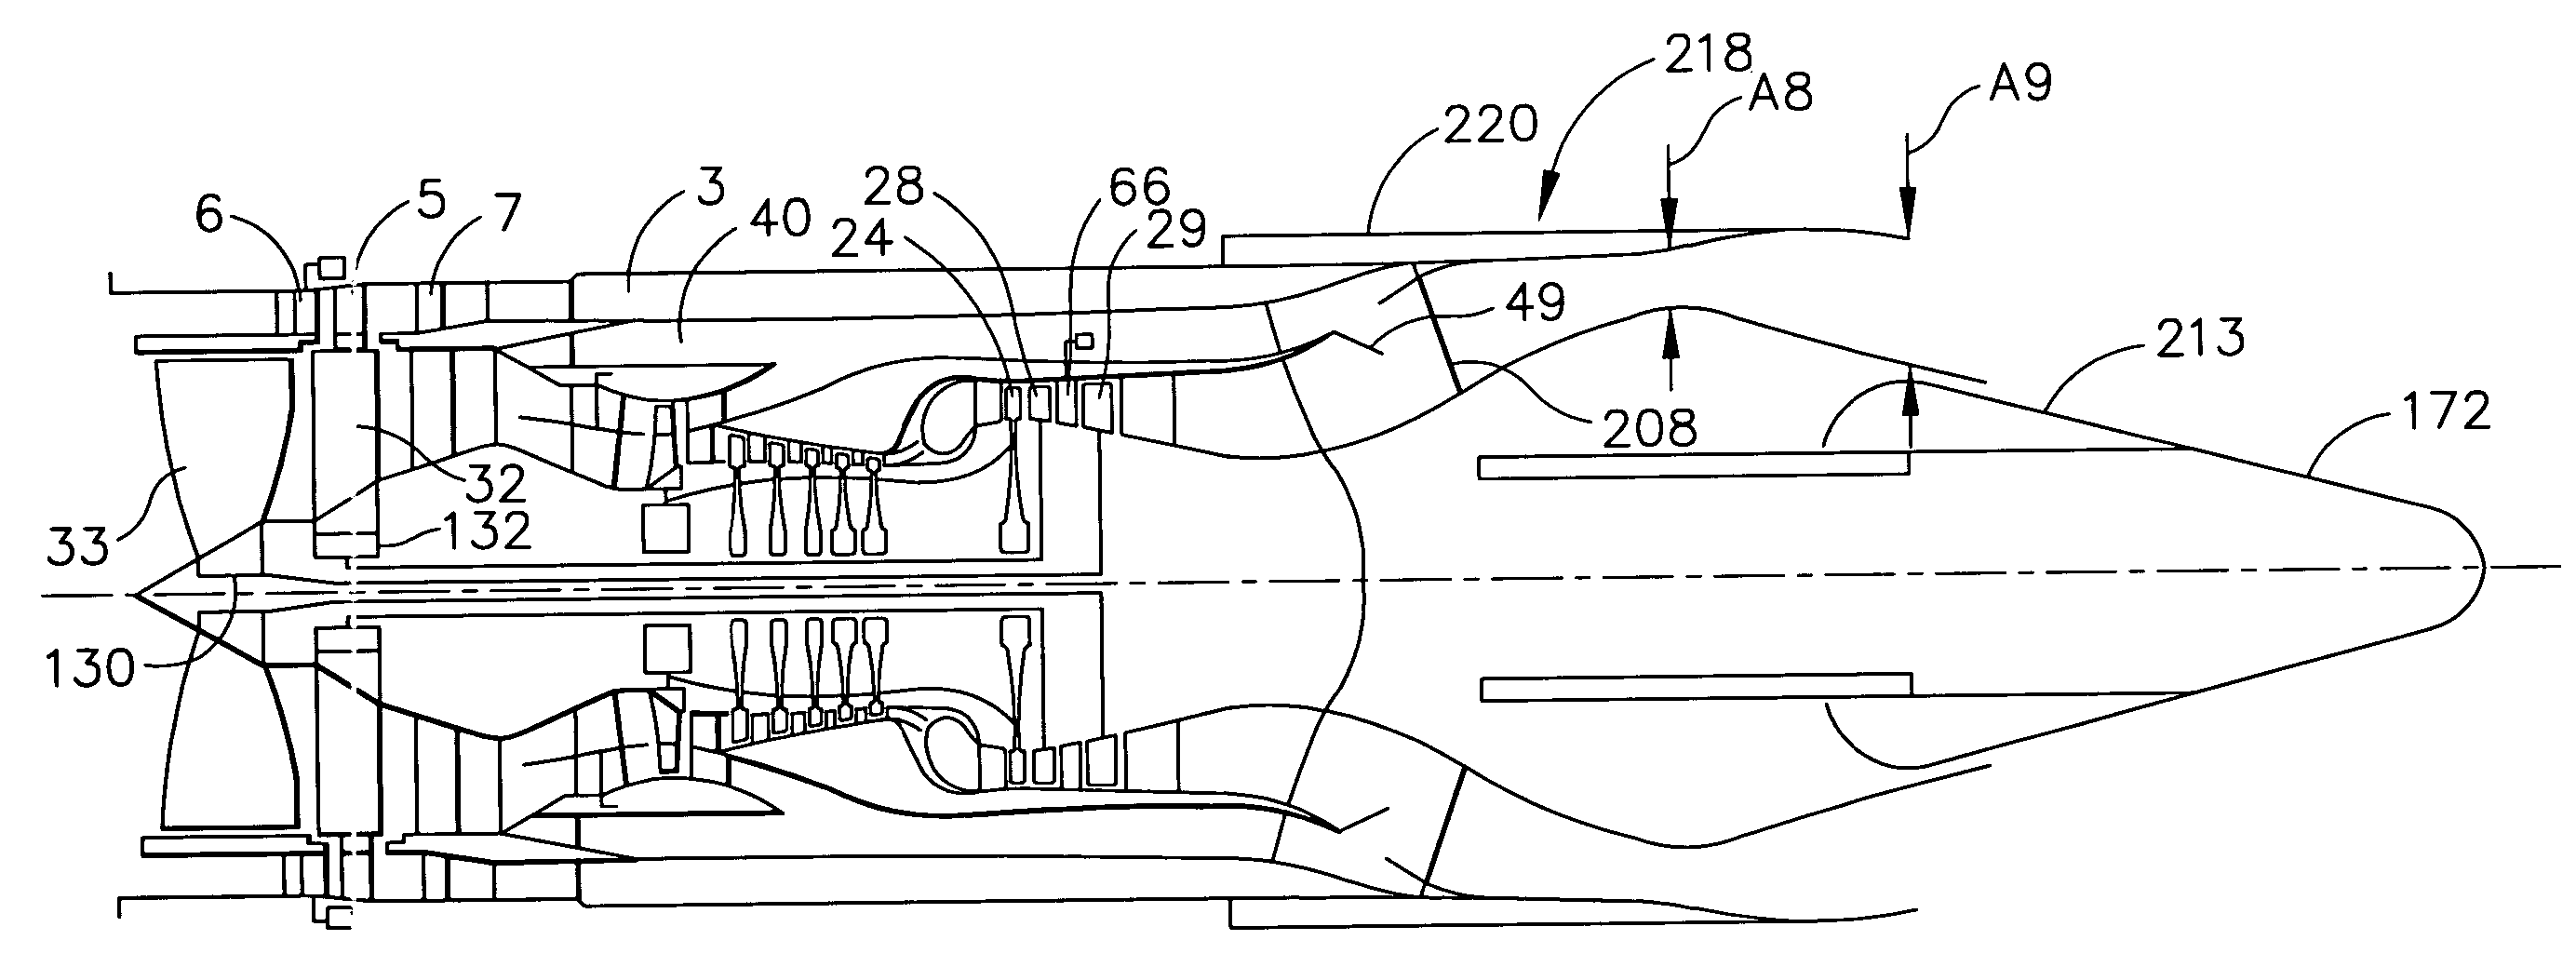 Flade gas turbine engine with counter-rotatable fans